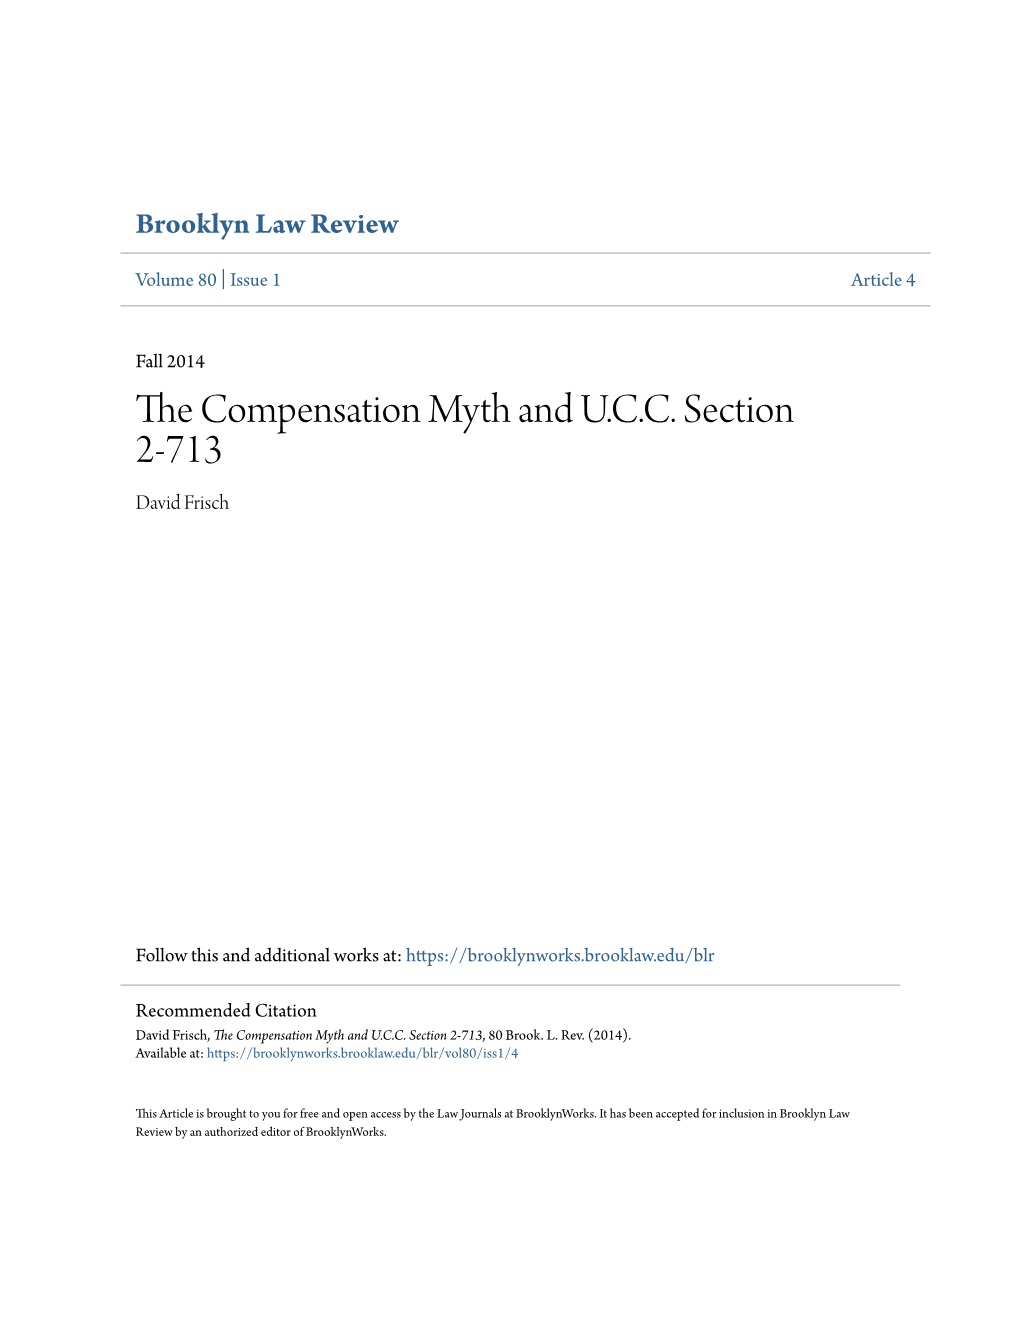 The Compensation Myth and U.C.C. Section 2-713, 80 Brook